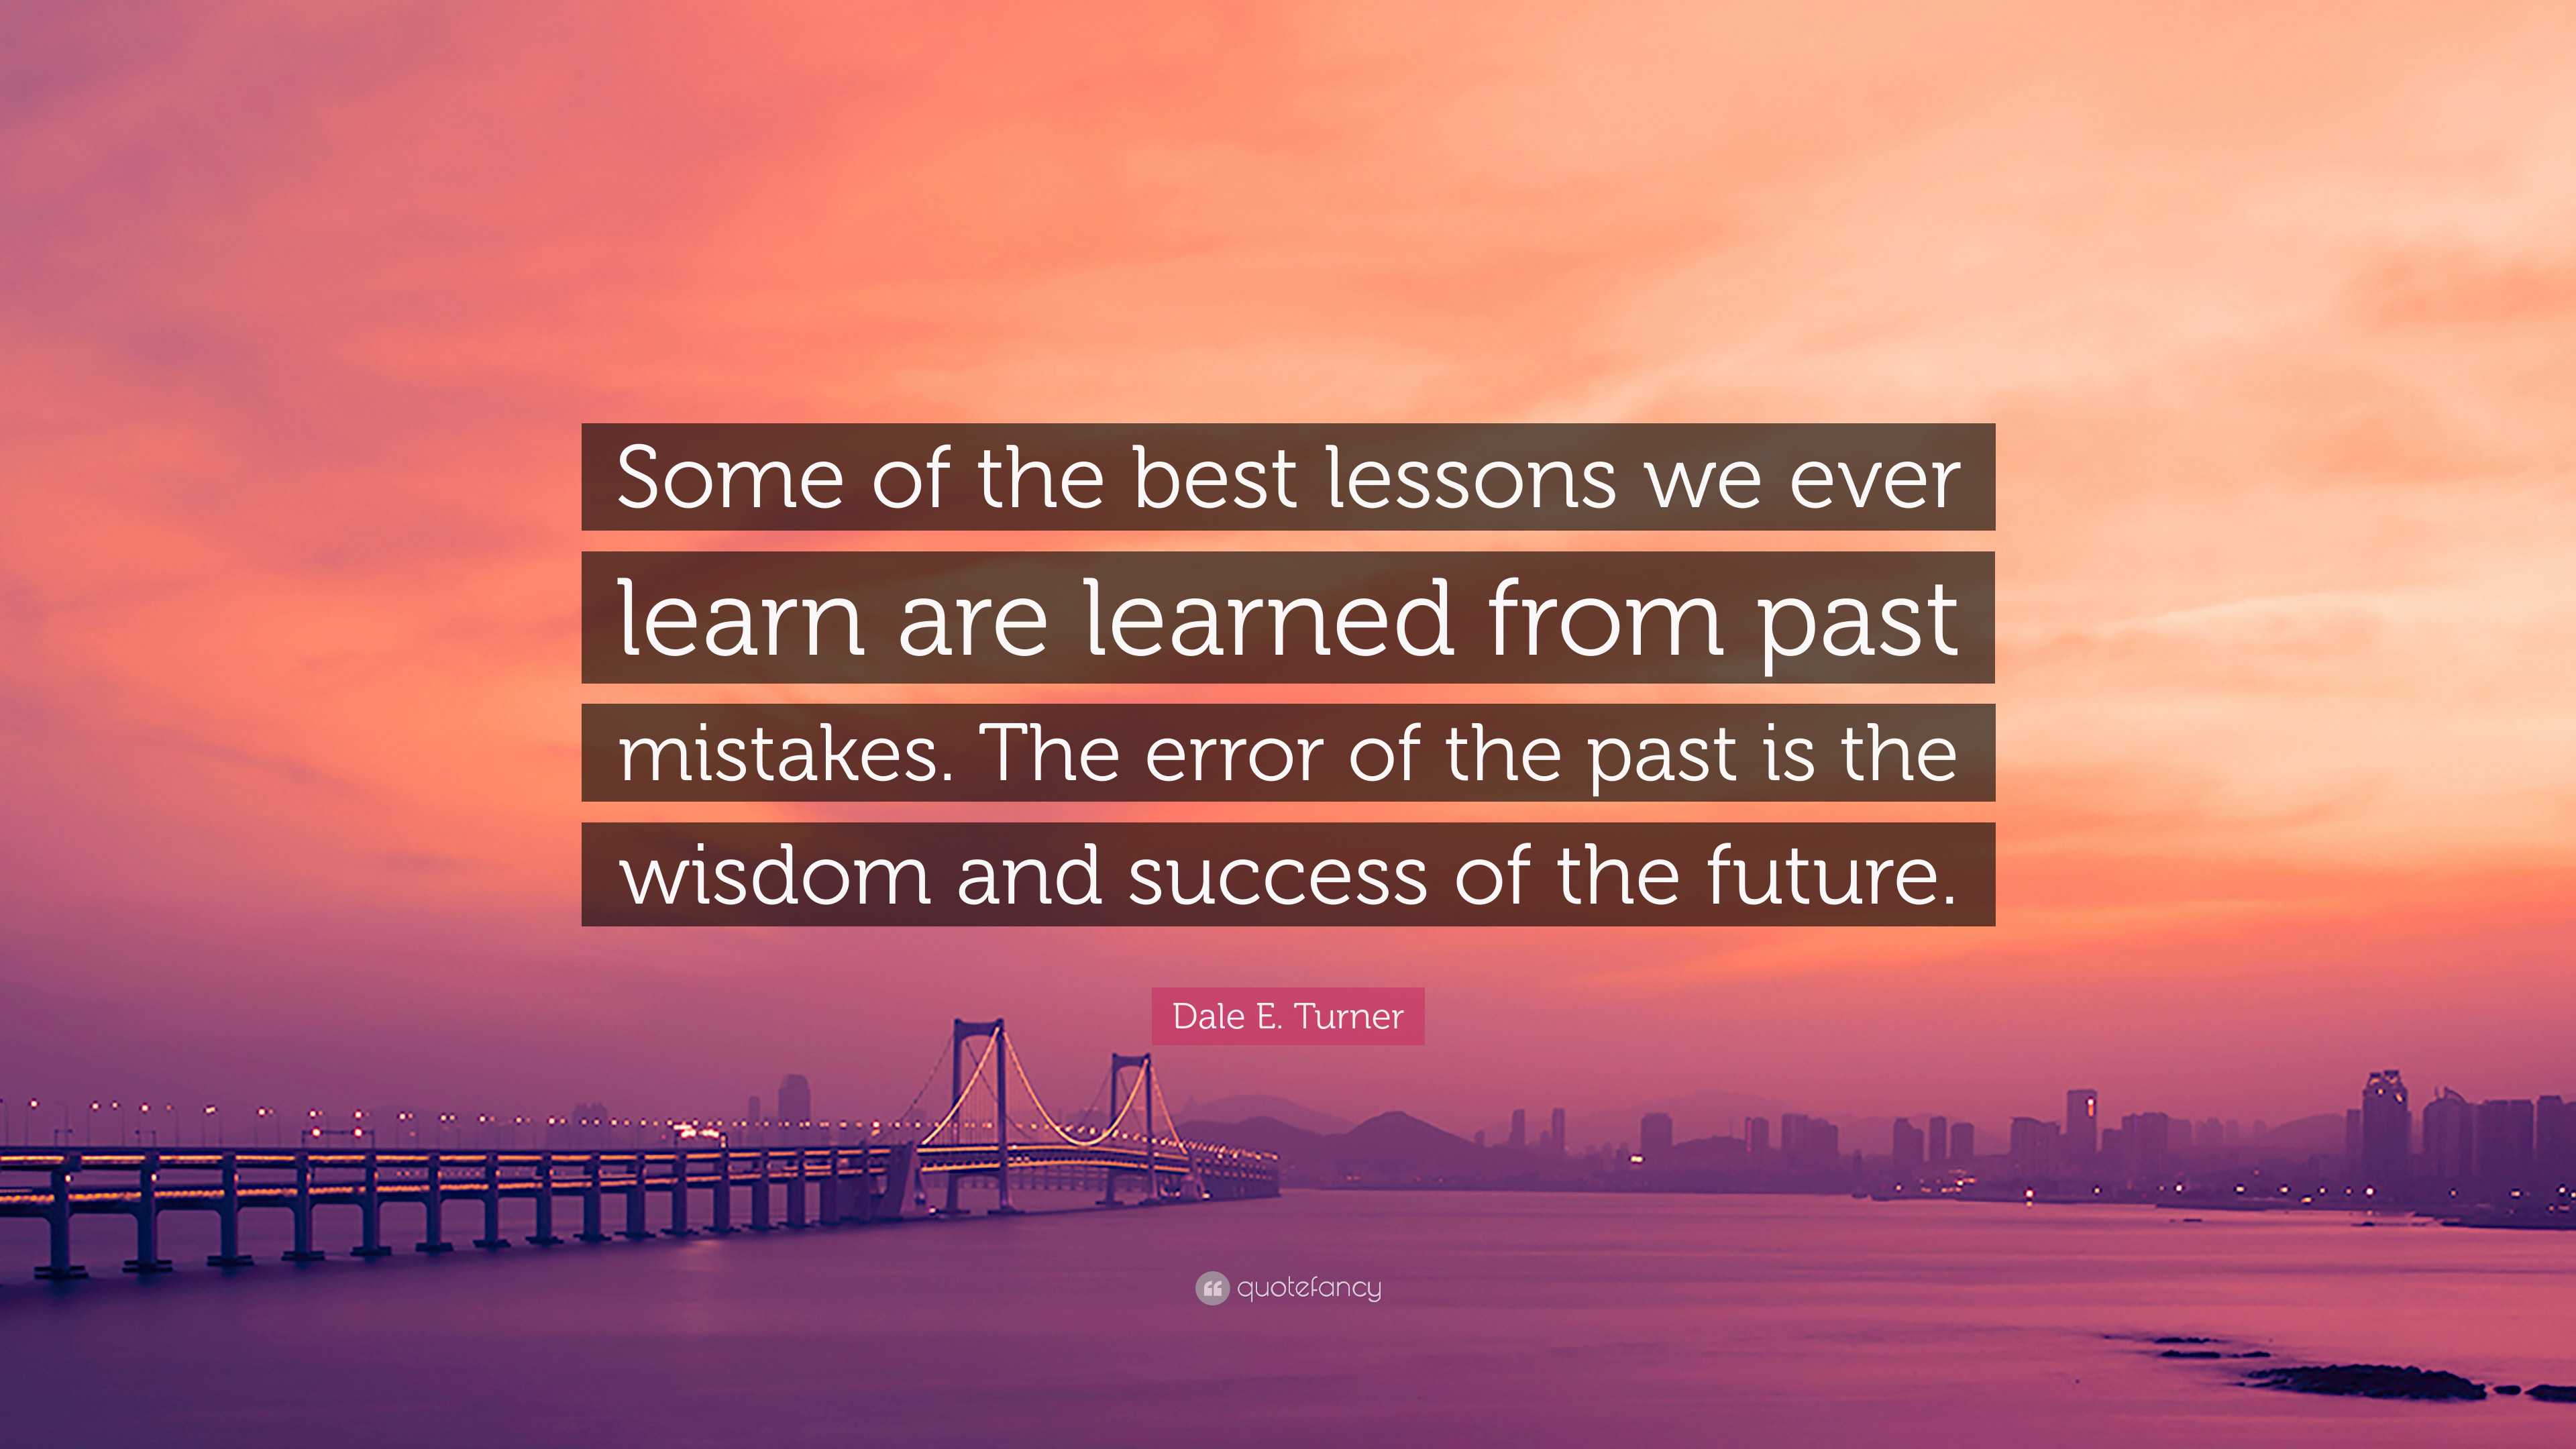 Dale E. Turner Quote: “Some of the best lessons we ever learn are